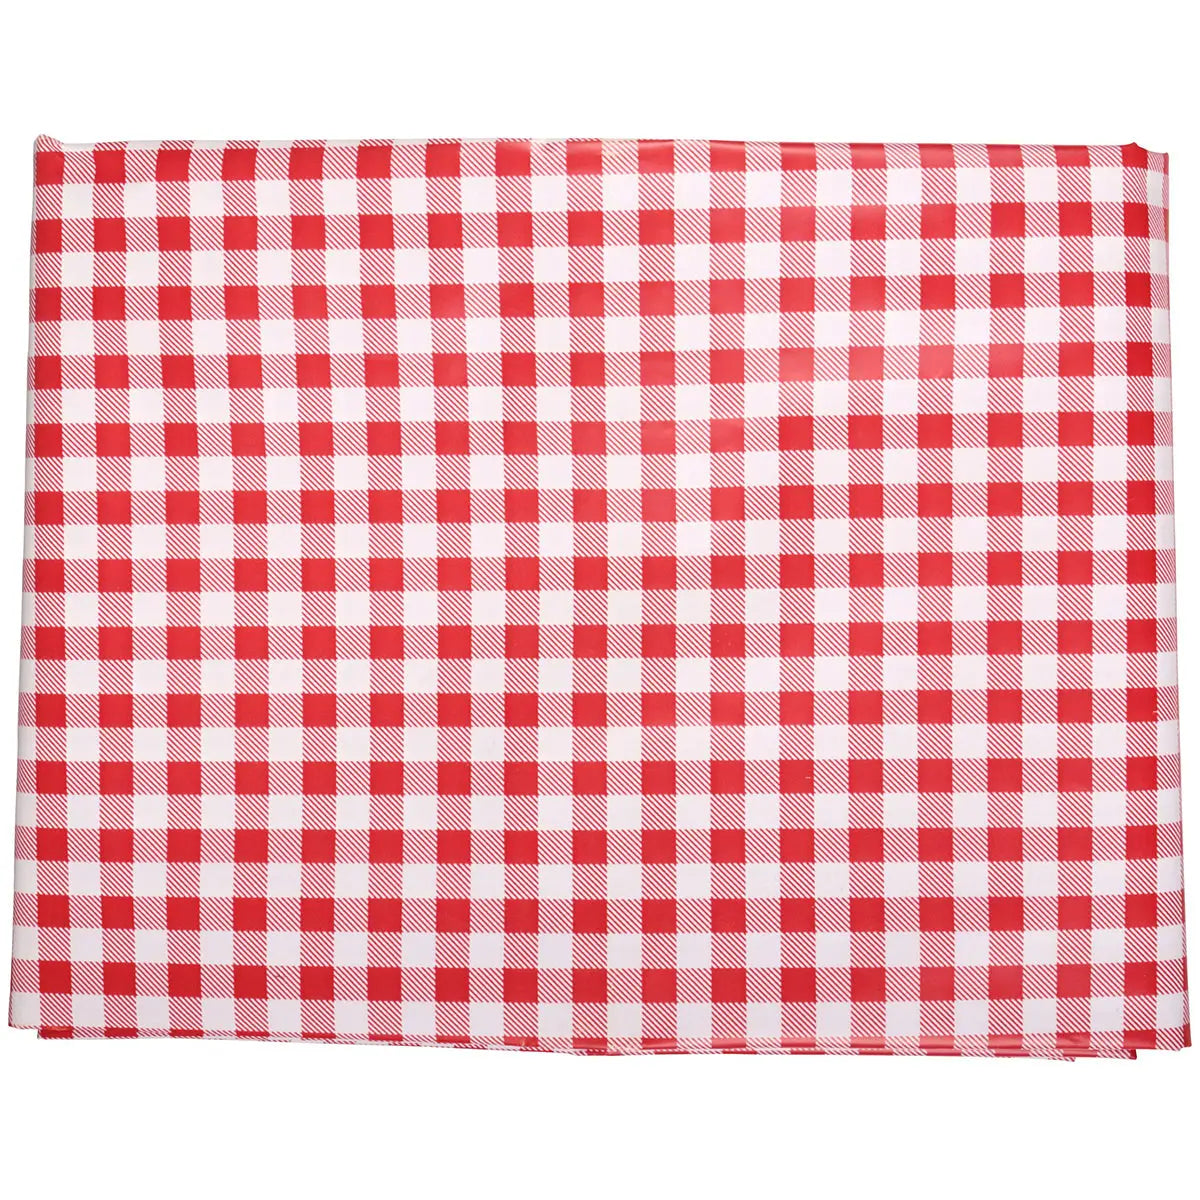 Coghlan's Picnic Combo Pack w/ 54"x72" Tablecloth & 6 Table Cloth Spring Clamps Coghlan's